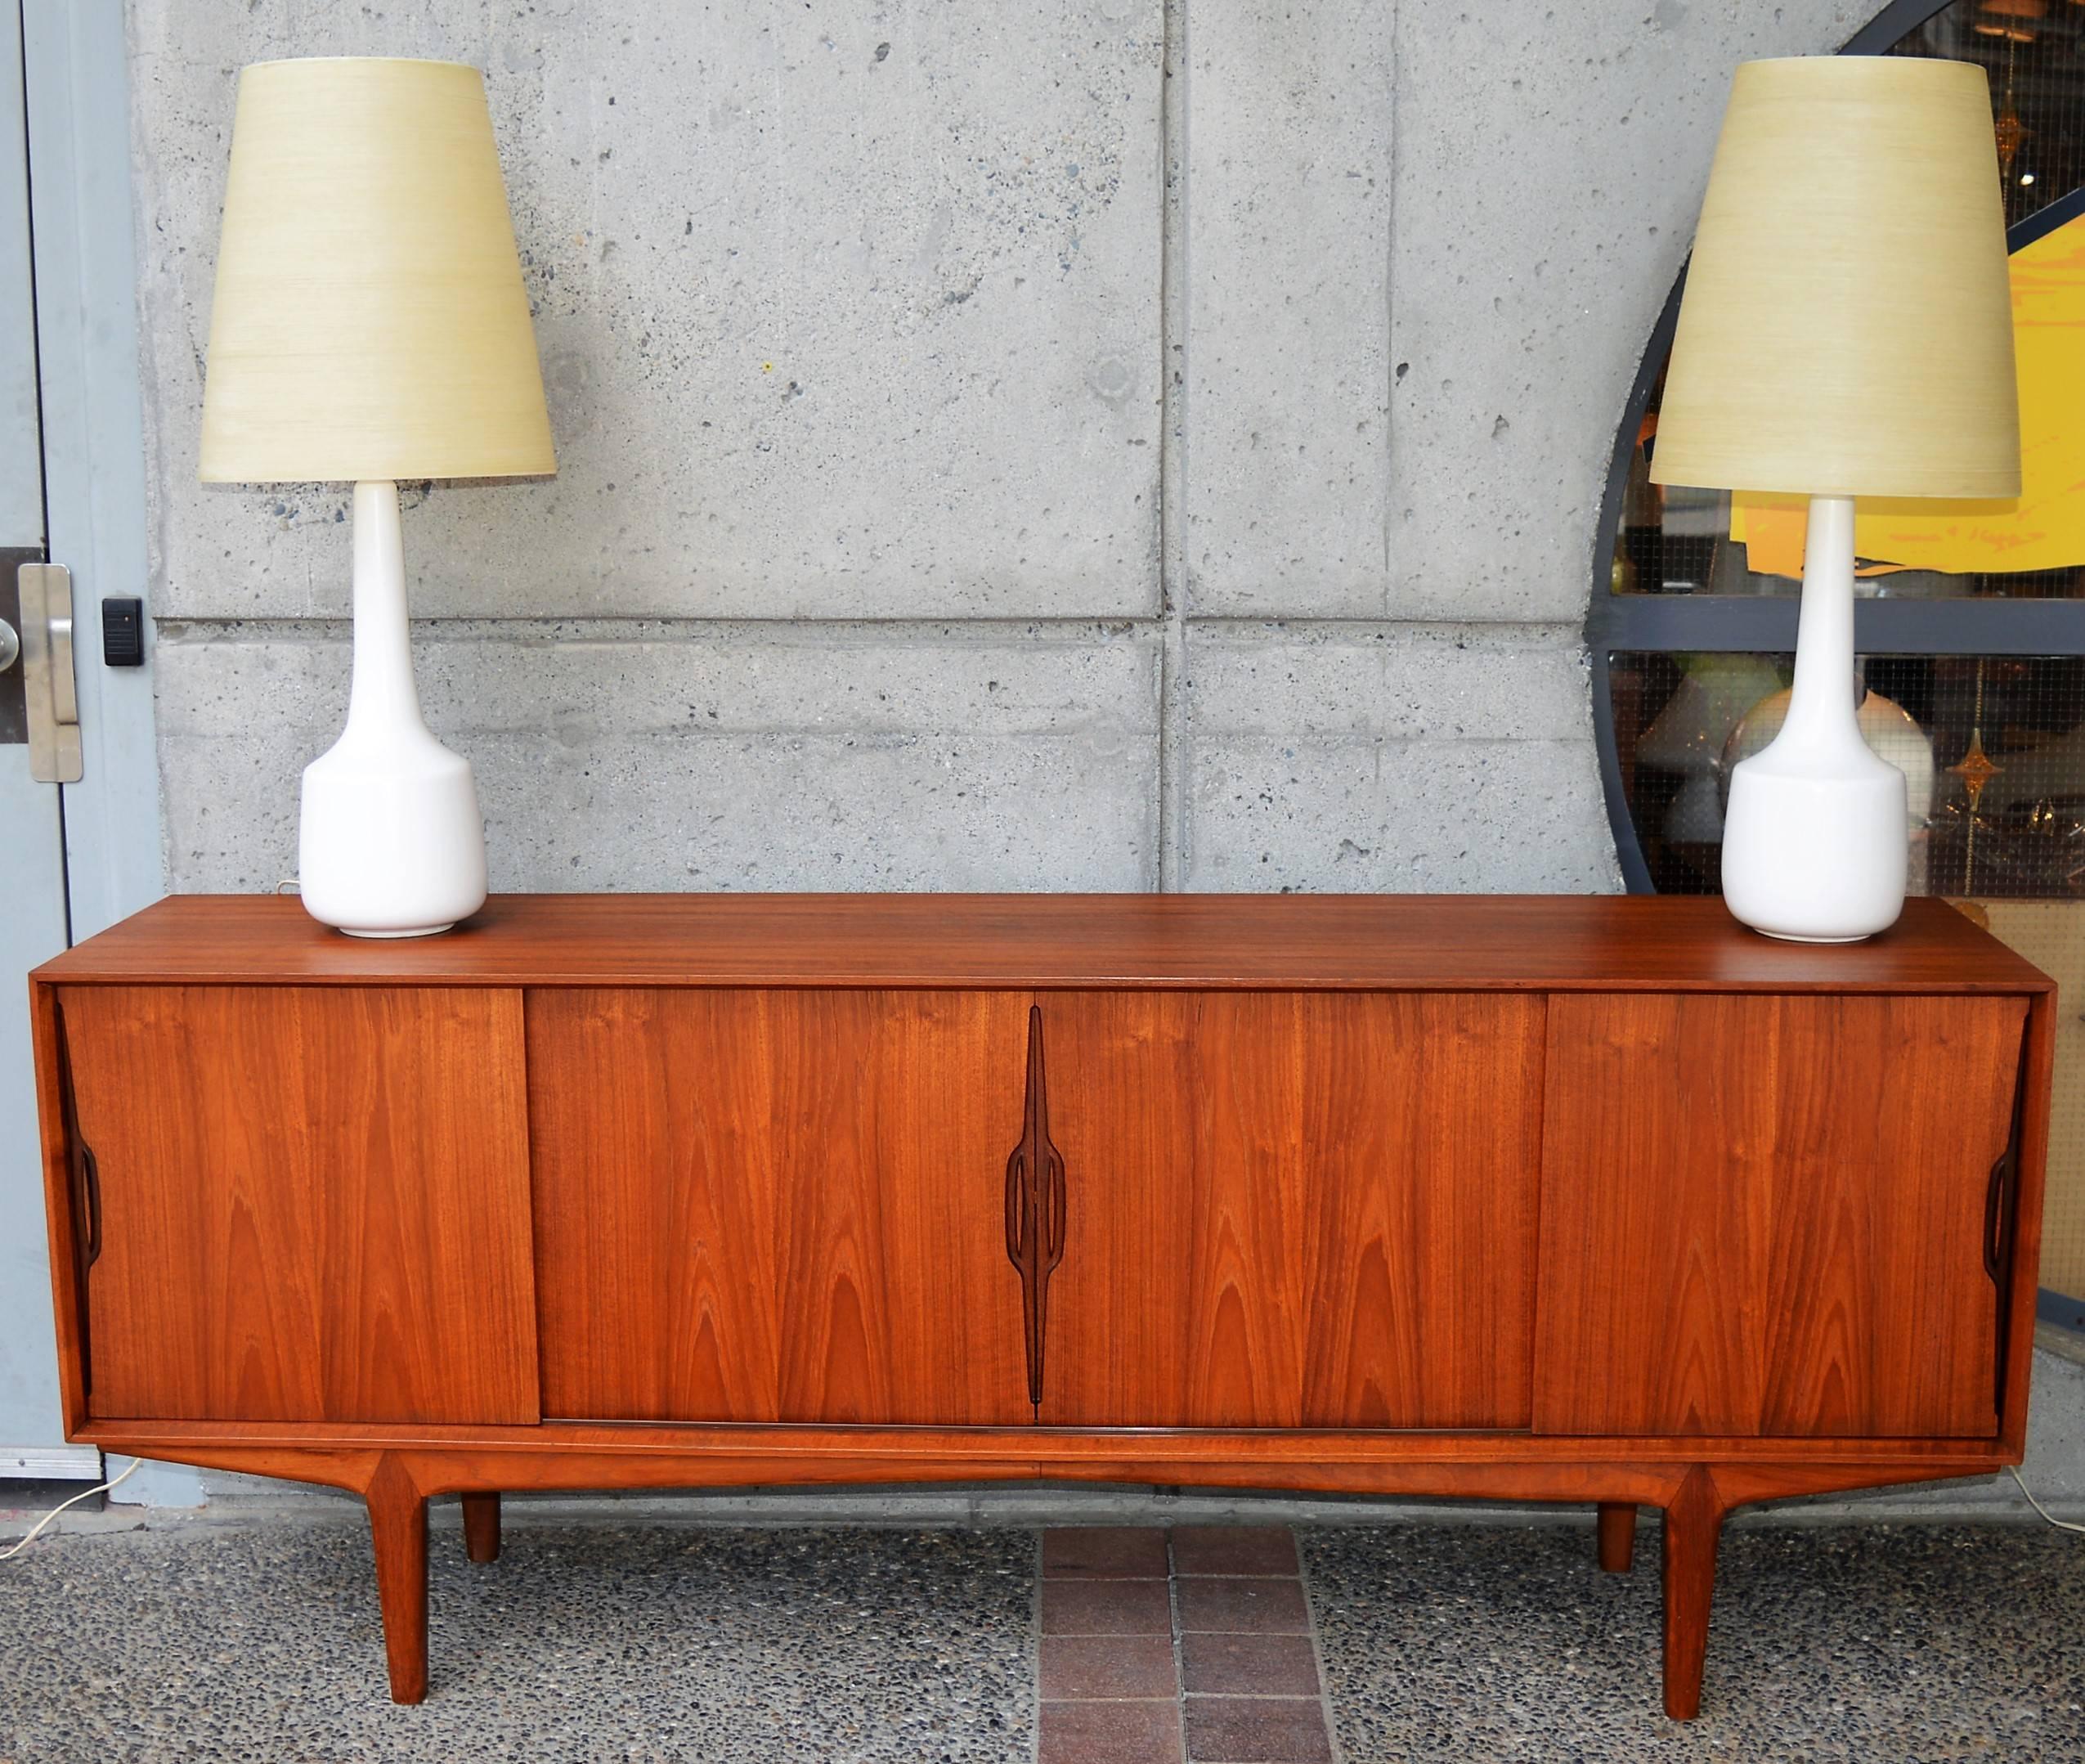 This stellar Danish teak buffet / credenza was designed by Knud Nielsen and has his iconic sculptural door pulls with a darker inside to really make them pop. Featuring clean, modern lines with crisp edges and a mitered front edge molding detail, as